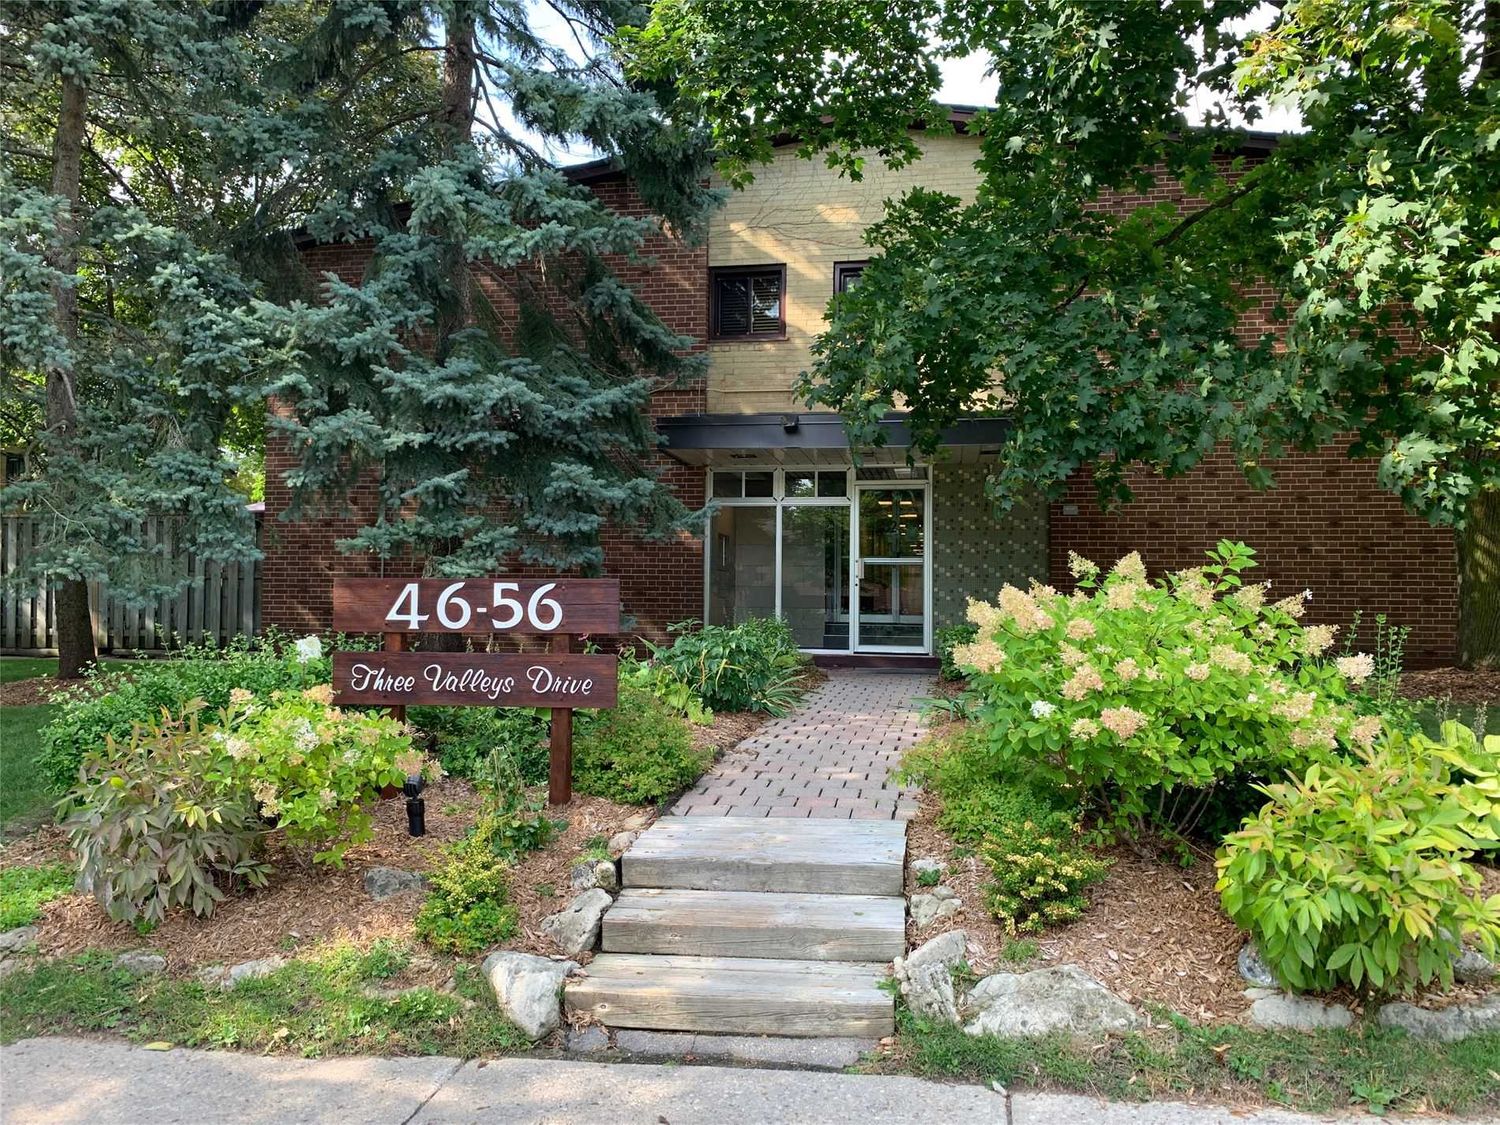 46-56 Three Valleys Drive. 46-56 Three Valleys Drive Townhomes is located in  North York, Toronto - image #2 of 2